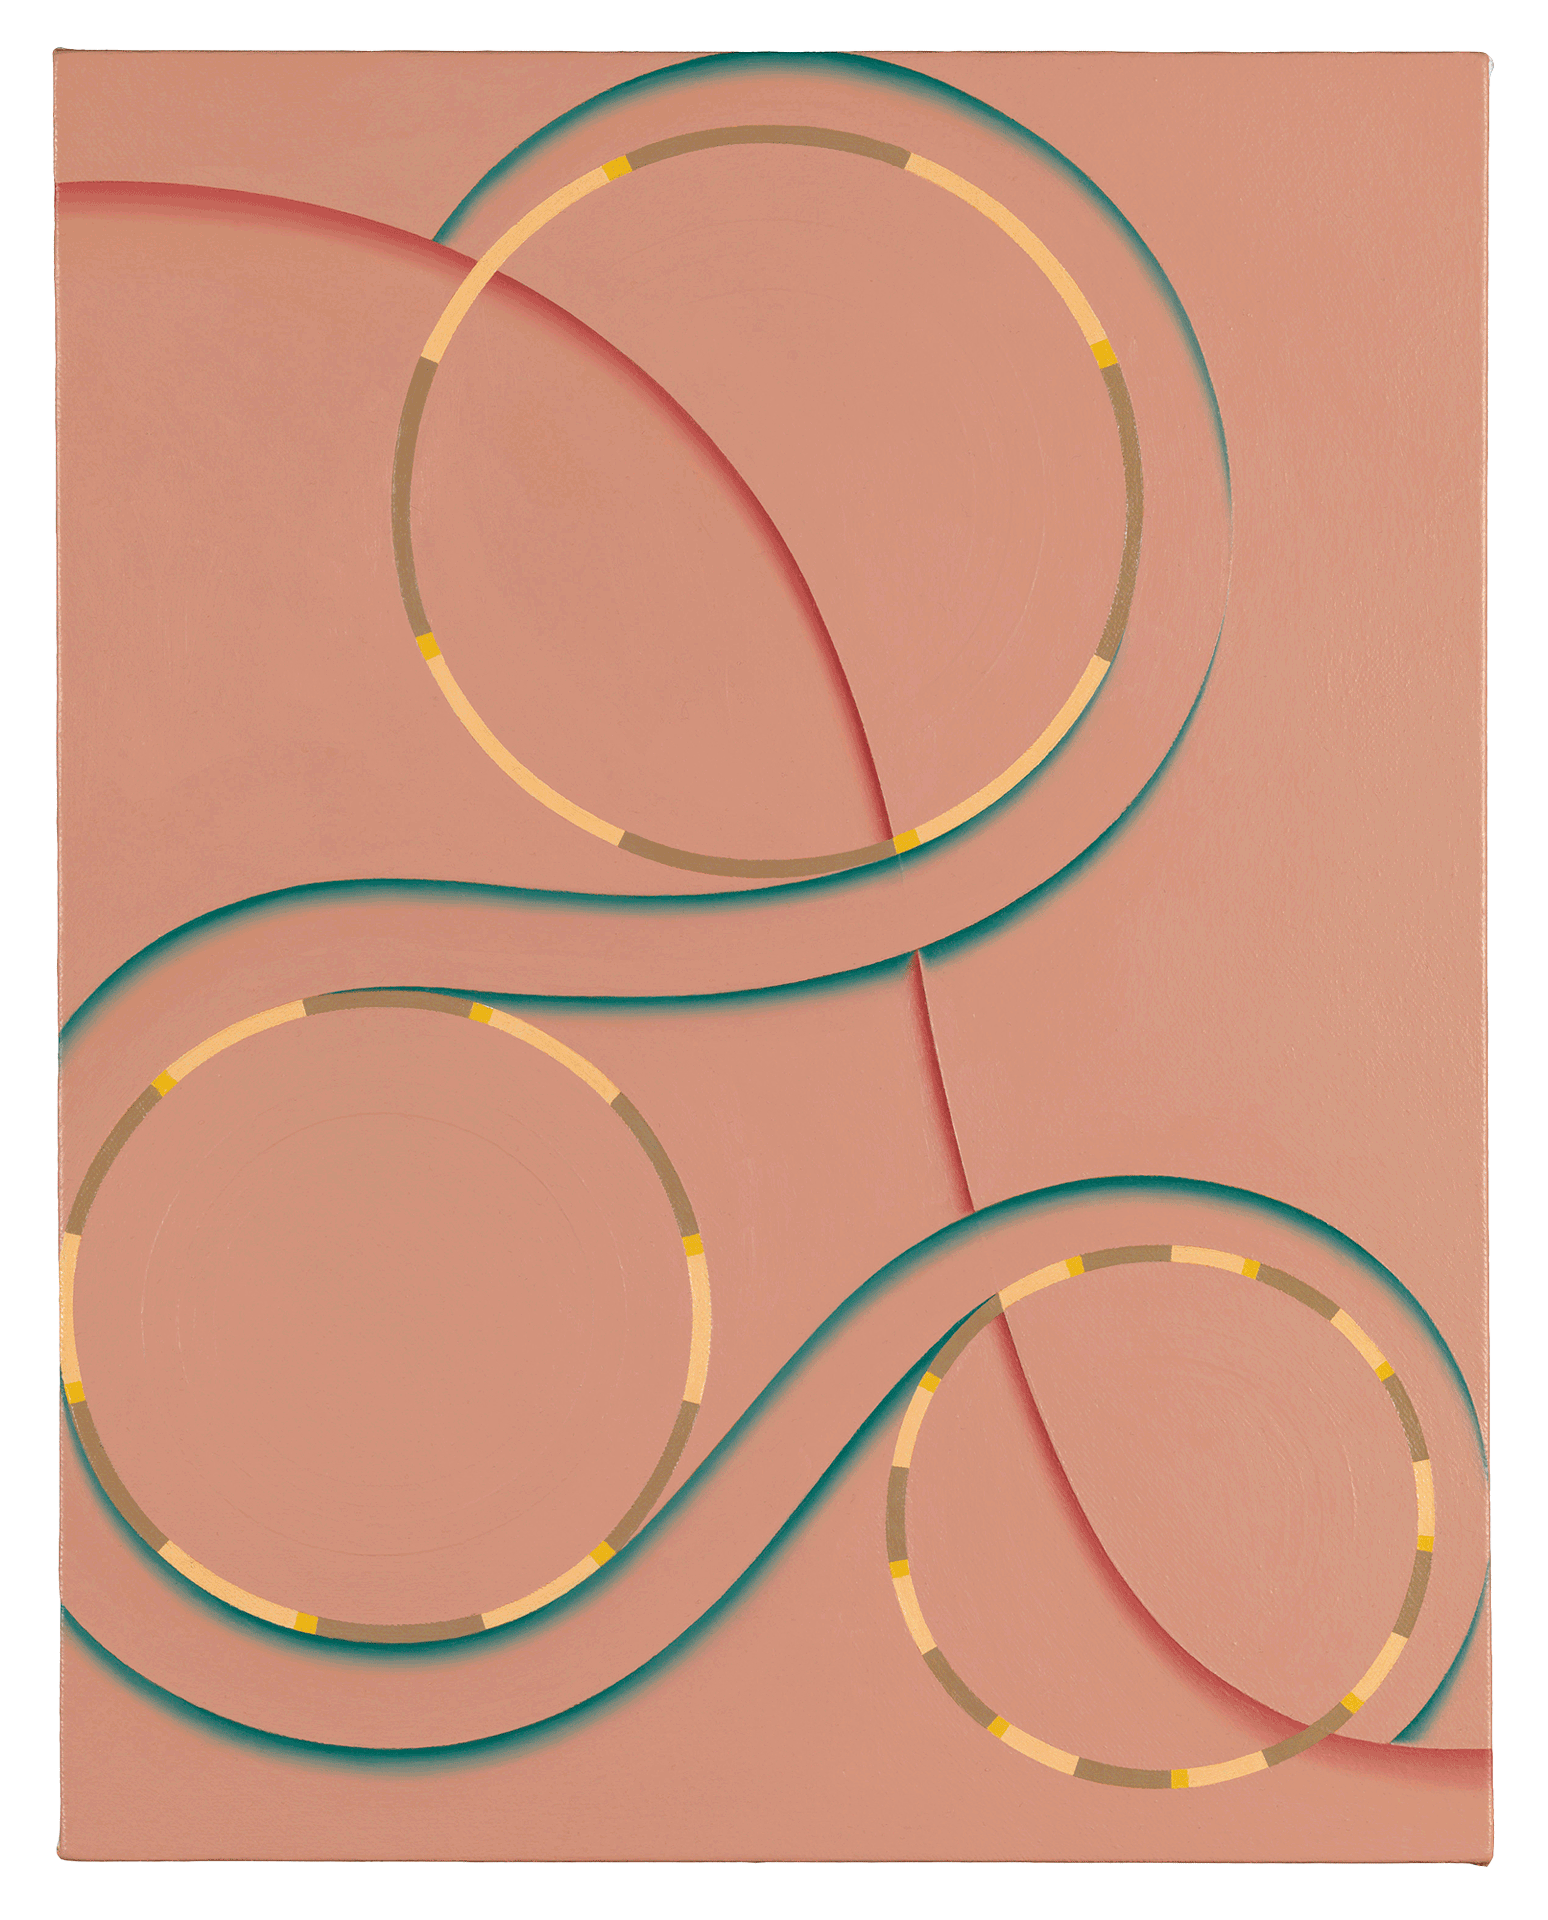 A painting by Tomma Abts, titled Isko, dated 2008.